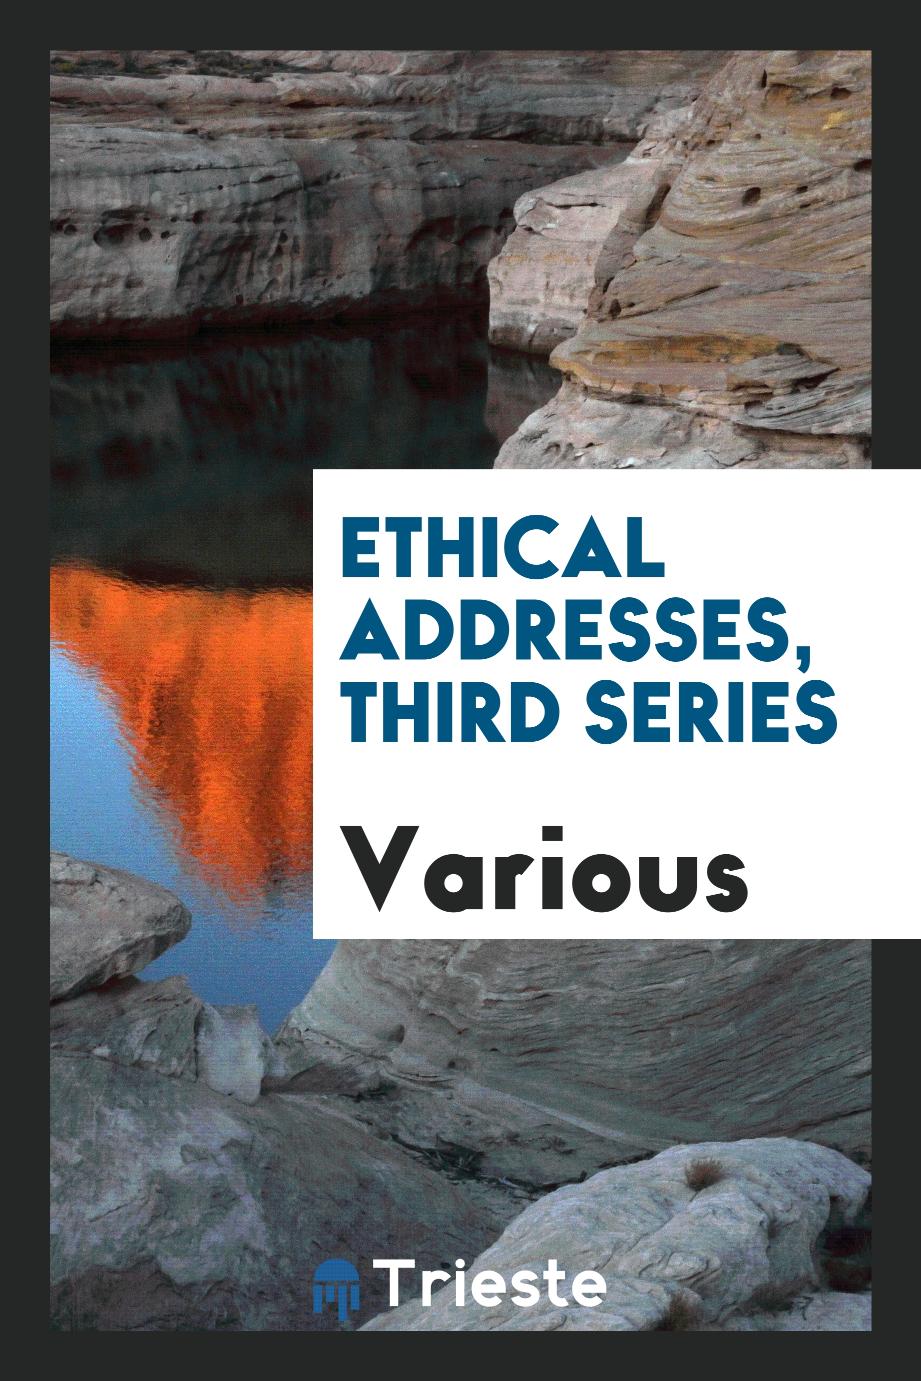 Ethical addresses, third series